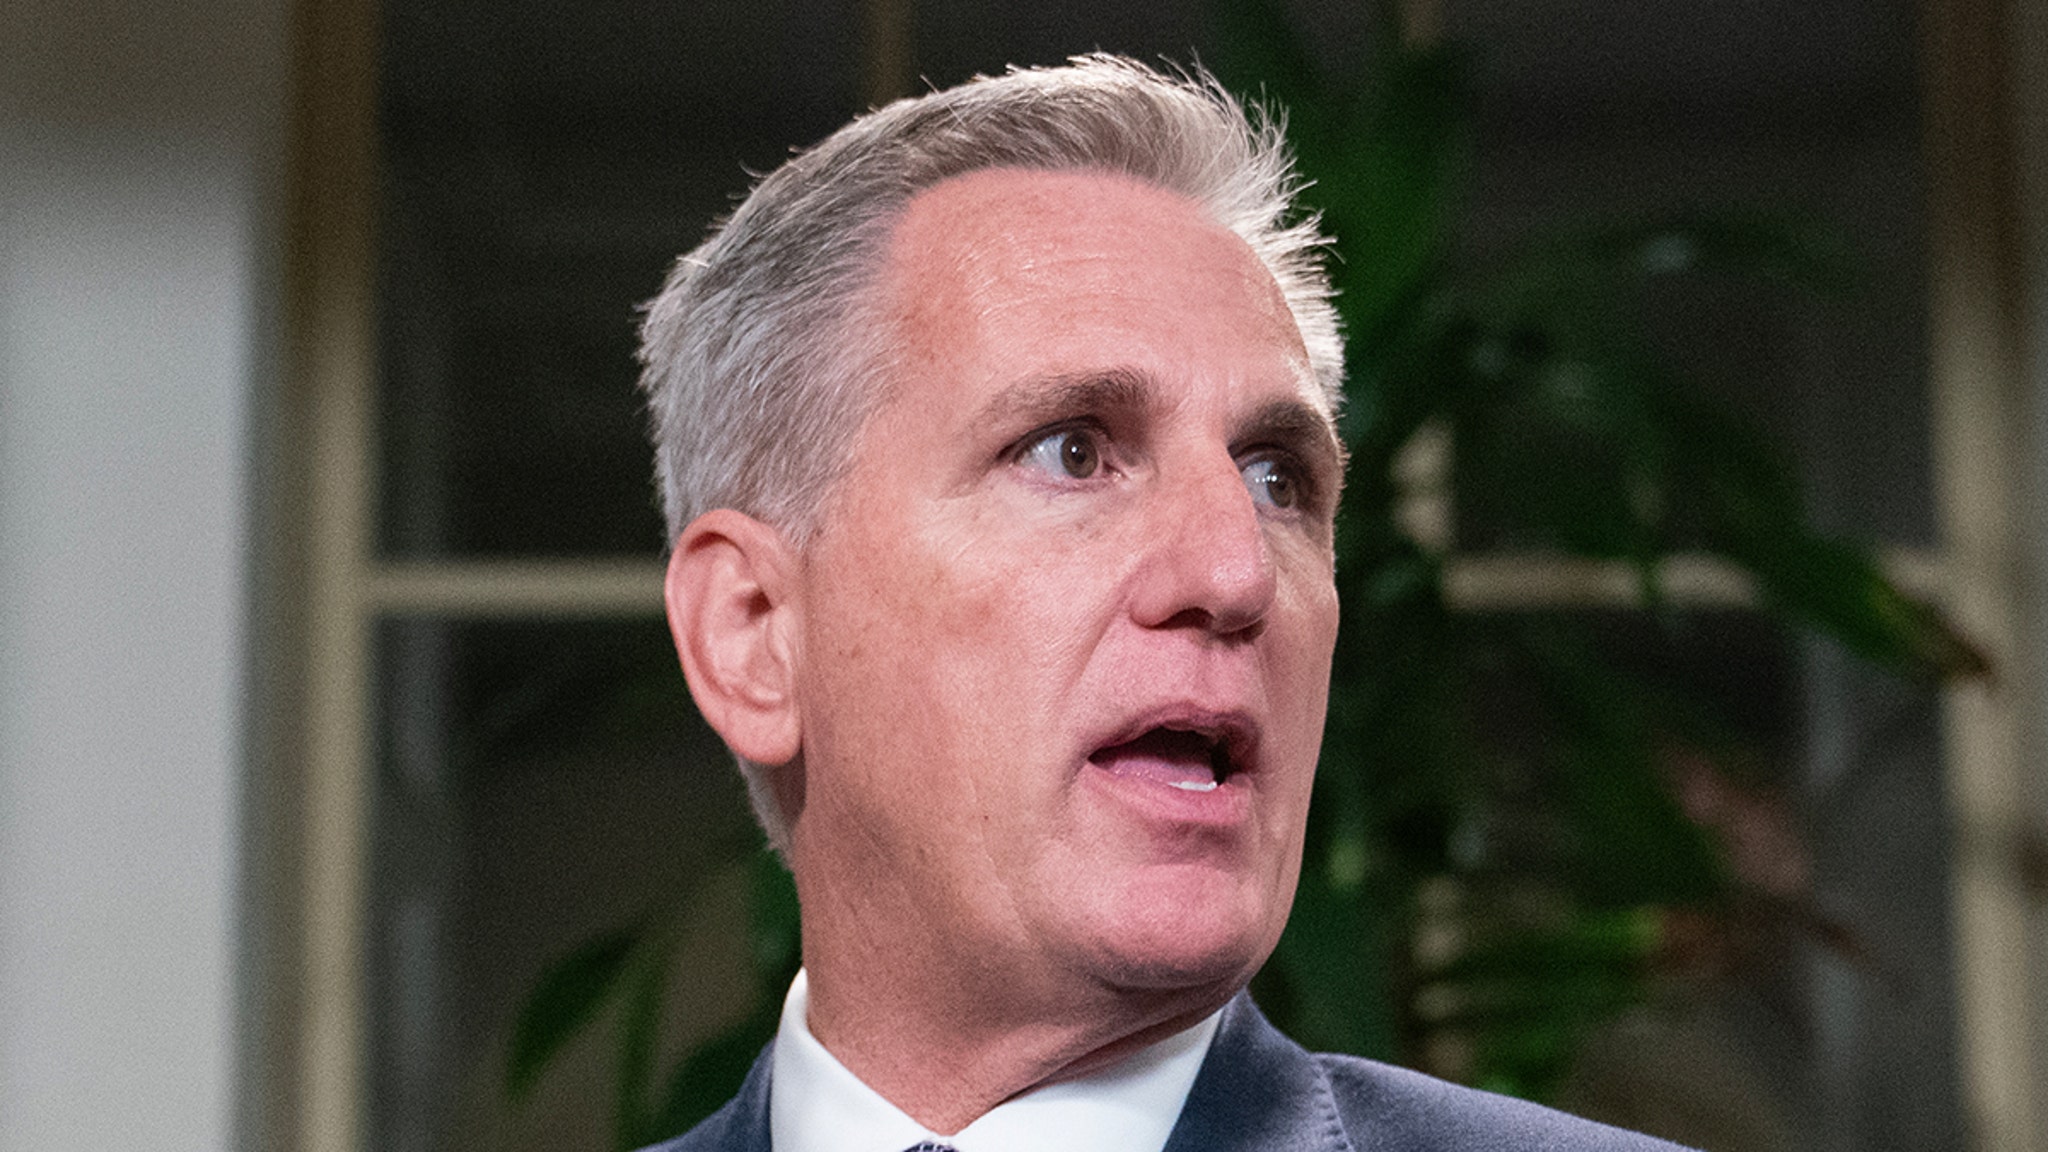 Rep. Kevin McCarthy voted against becoming Speaker of the House for the first time in history